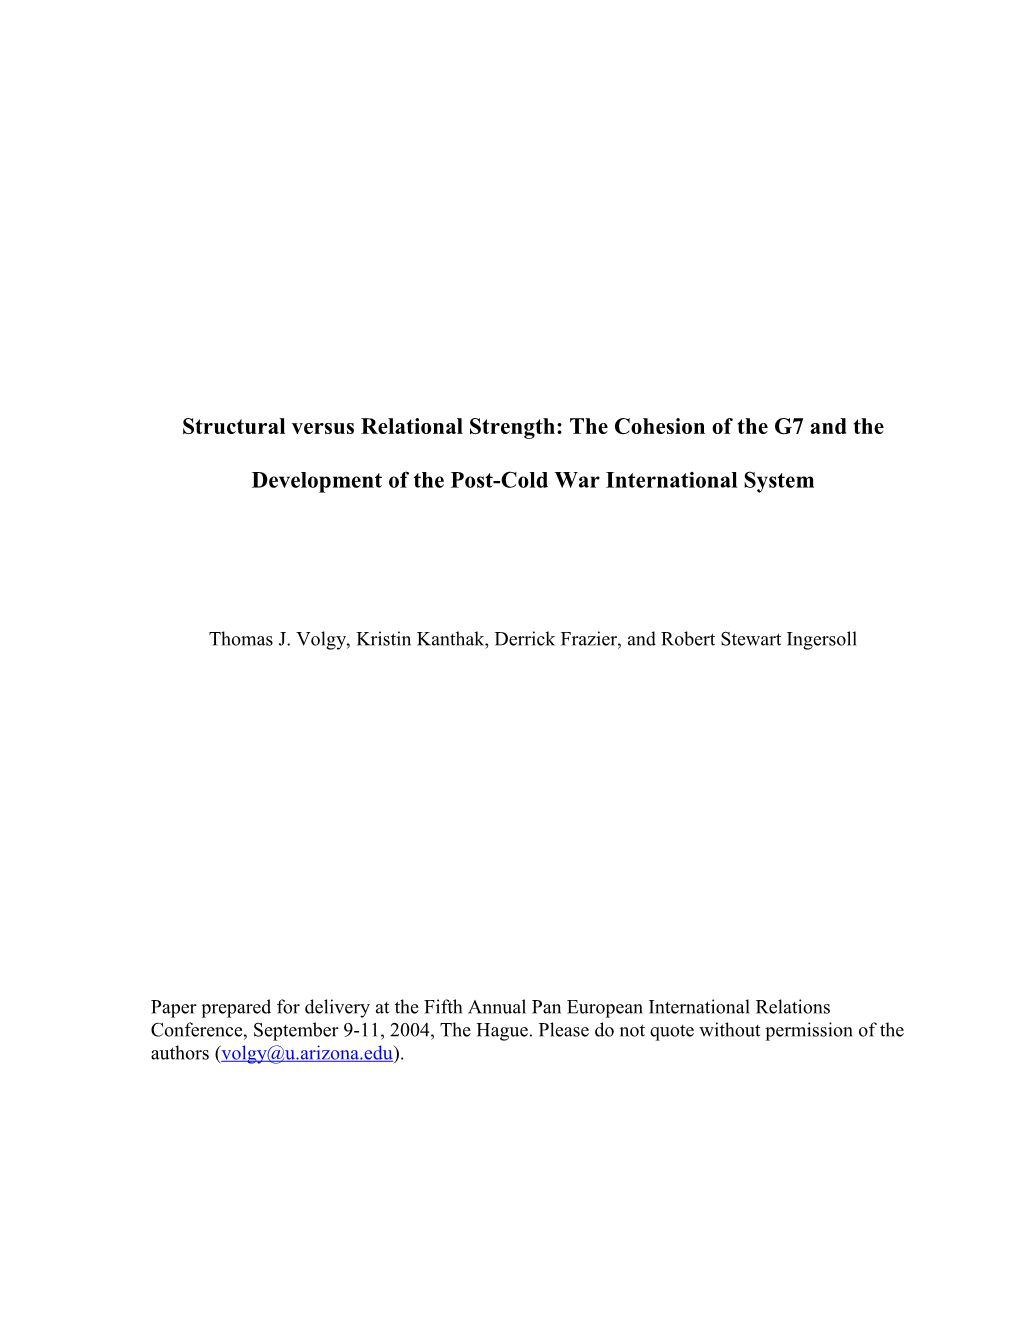 Structural Versus Relational Strength: the Development of the Post-Cold War International System